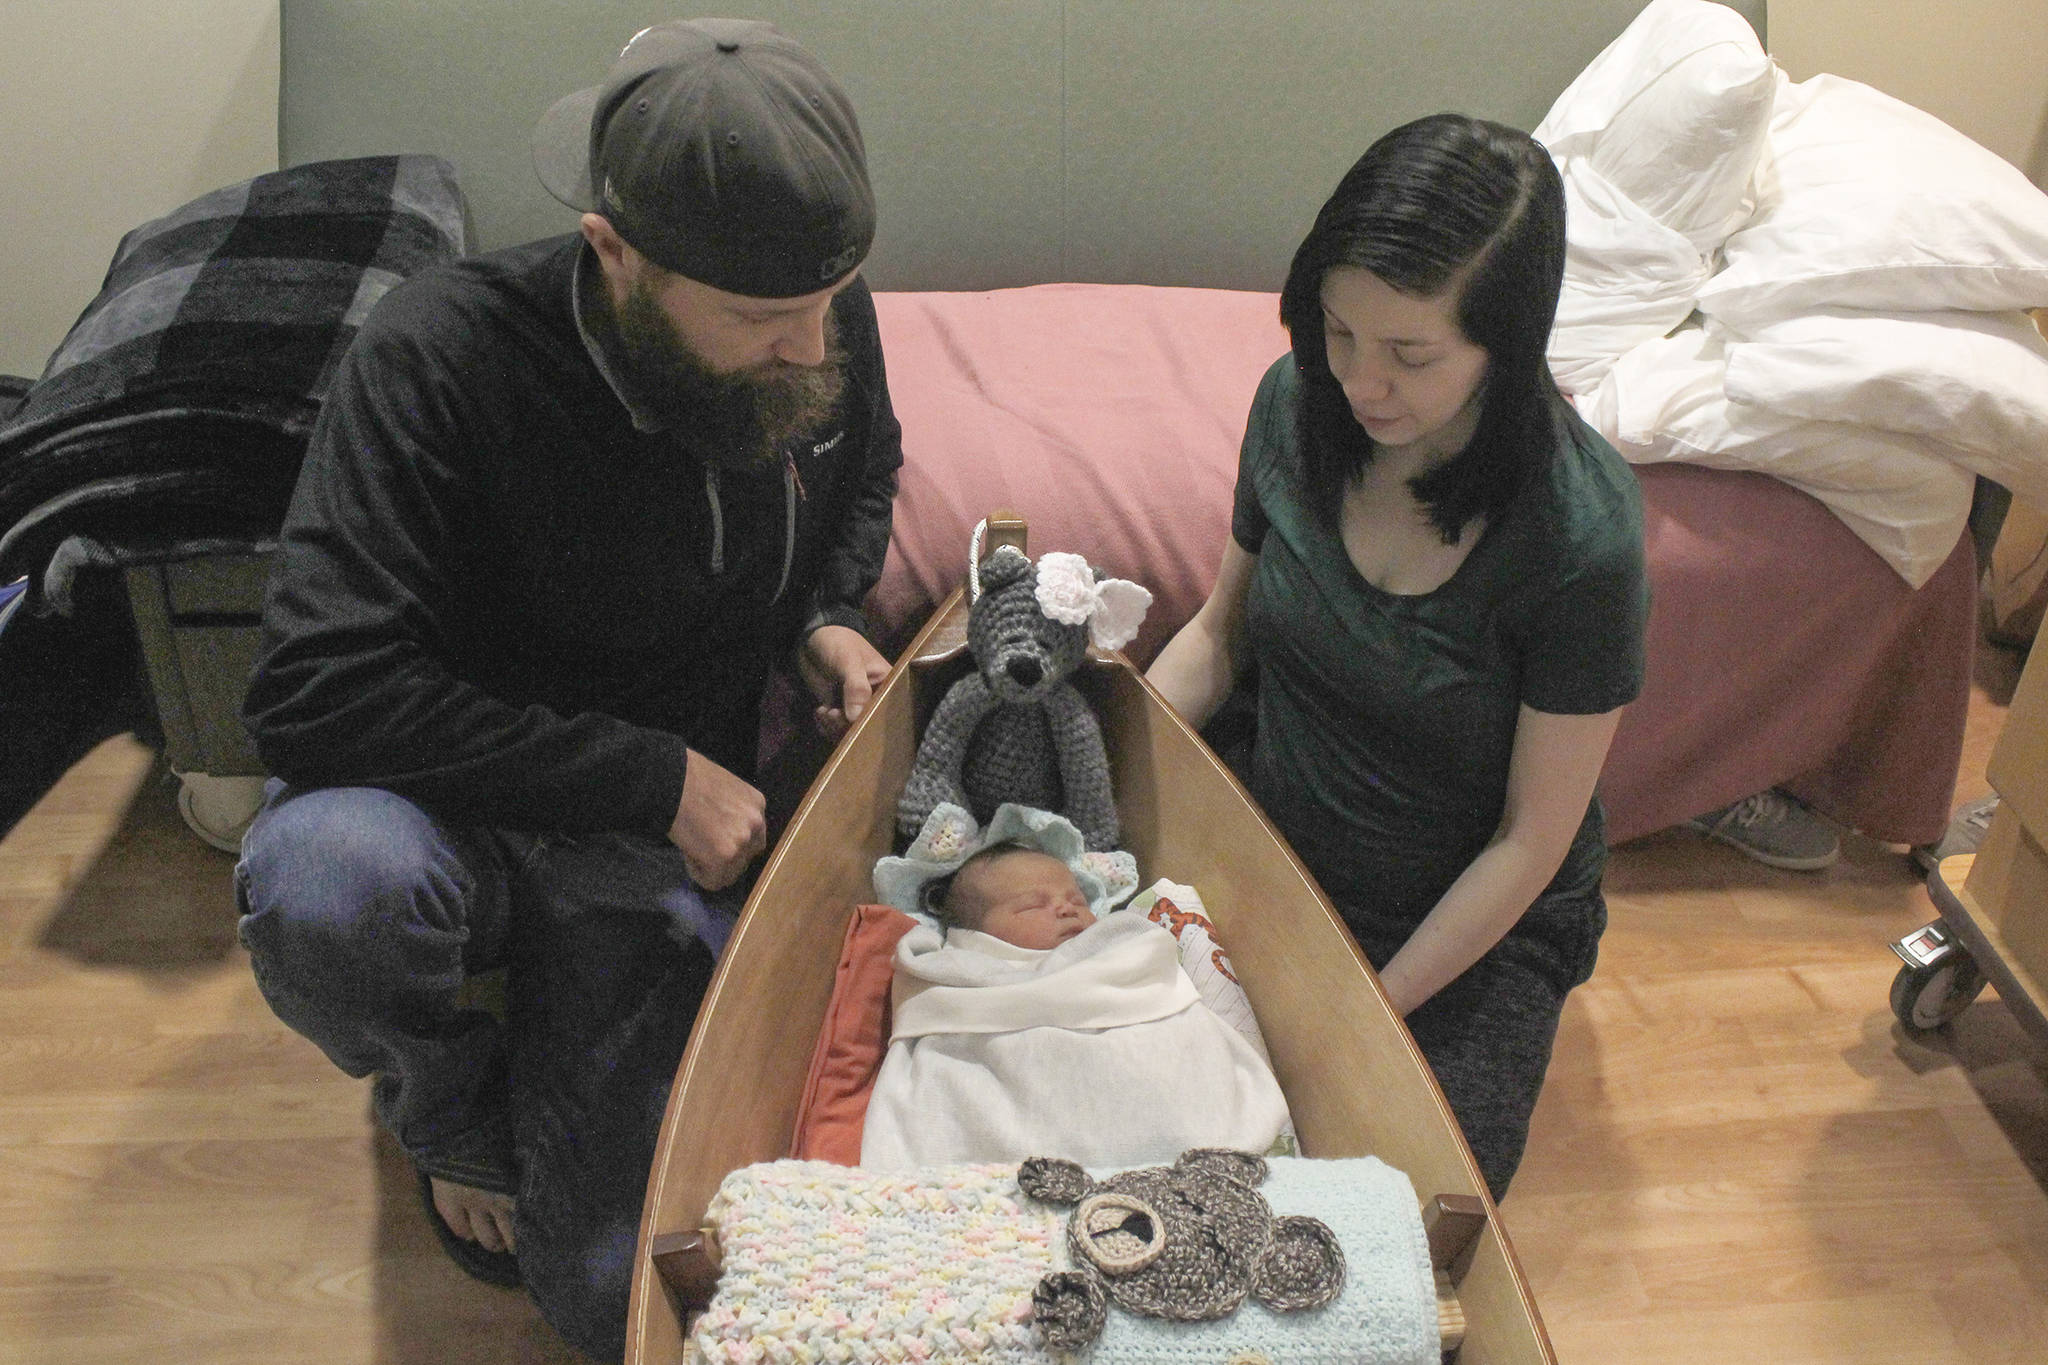 Yakutat residents Cody Kunau and Samantha Munoz sit with their baby Saige Roisin Kuneau on Friday, Jan. 4 at Bartlett Regional Hospital. Saige was the first baby born at the hospital this year, and received a boat carved by BRH Emergency Room Dr. Lindy Jones. (Alex McCarthy | Juneau Empire)